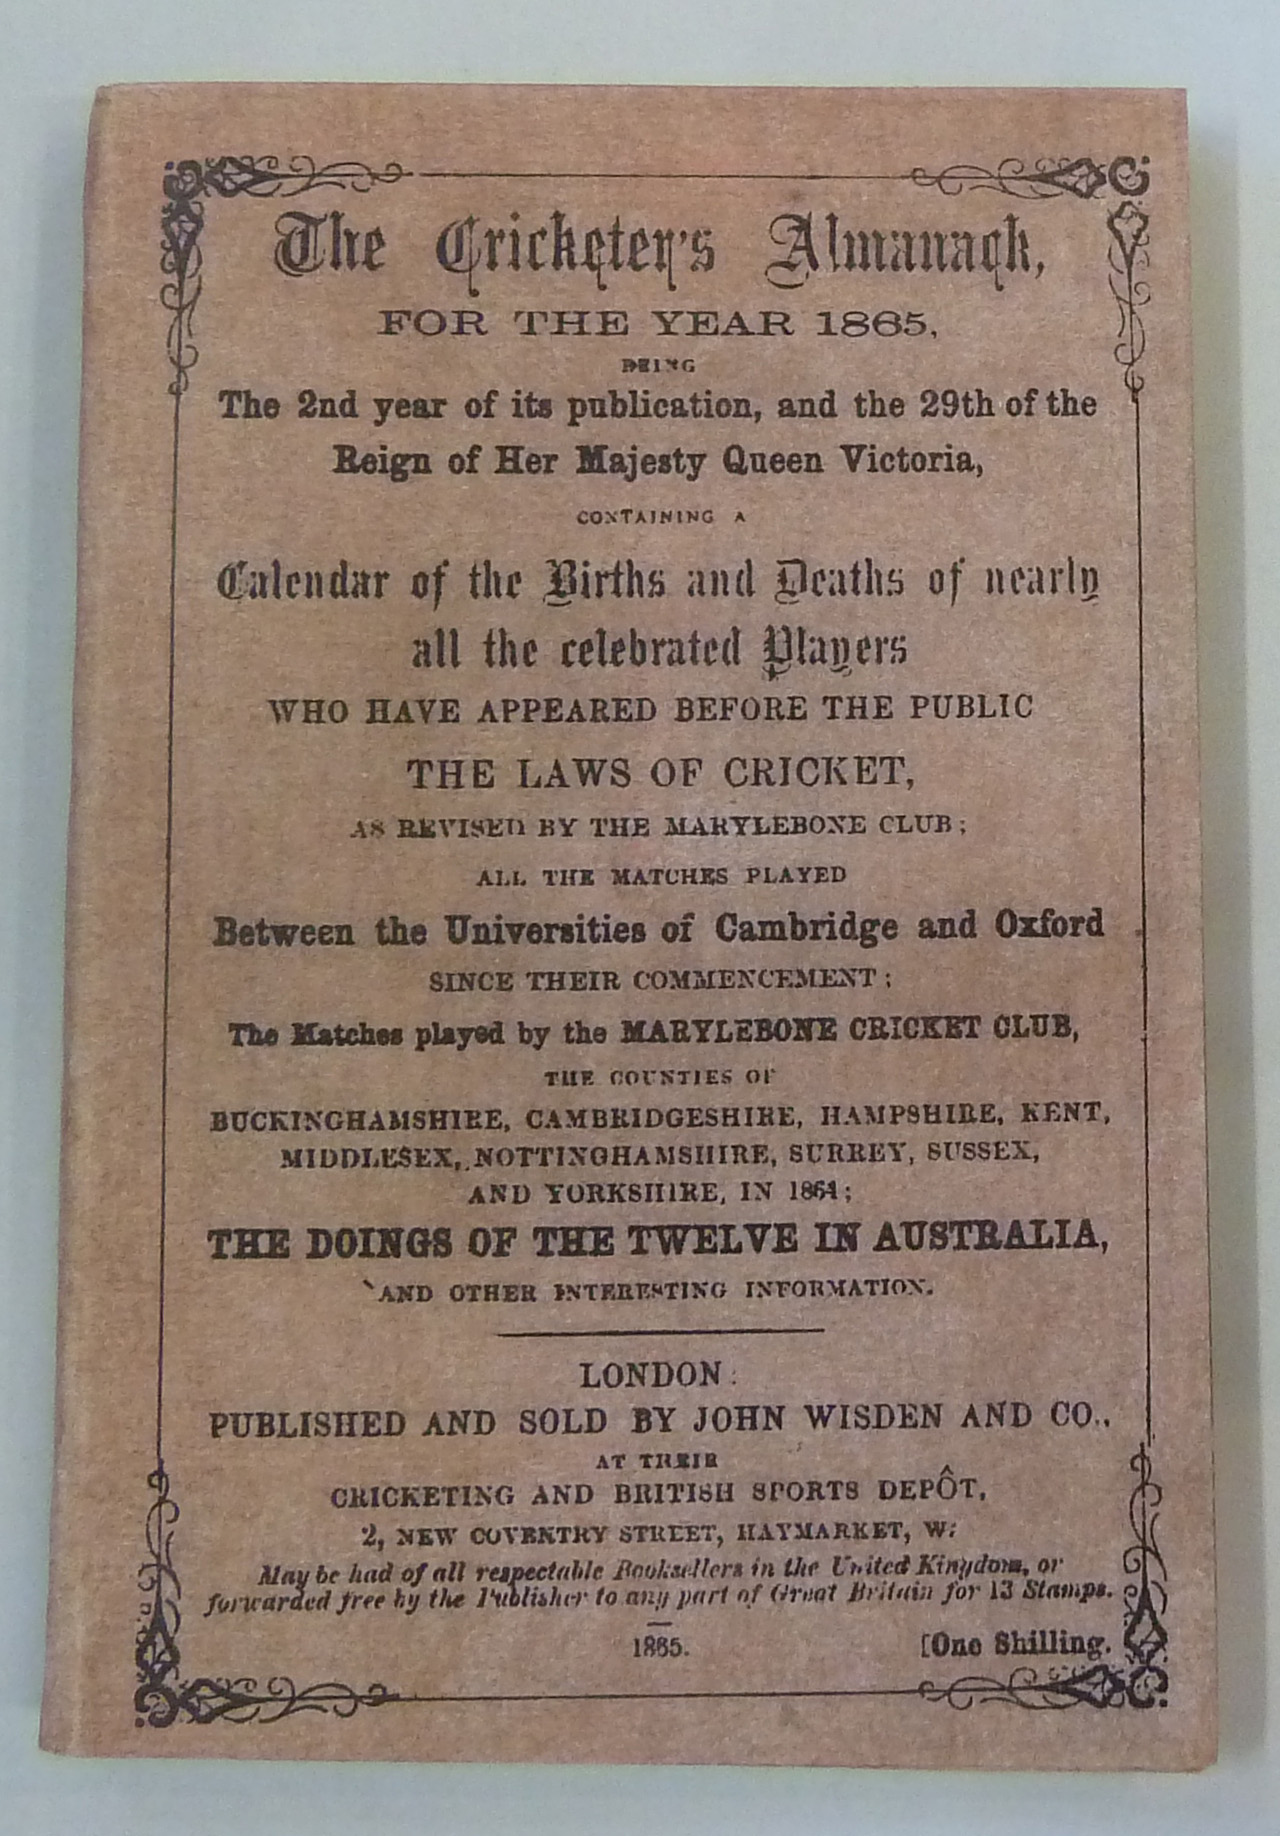 Wisden The Cricketer's Almanack for the Year 1865